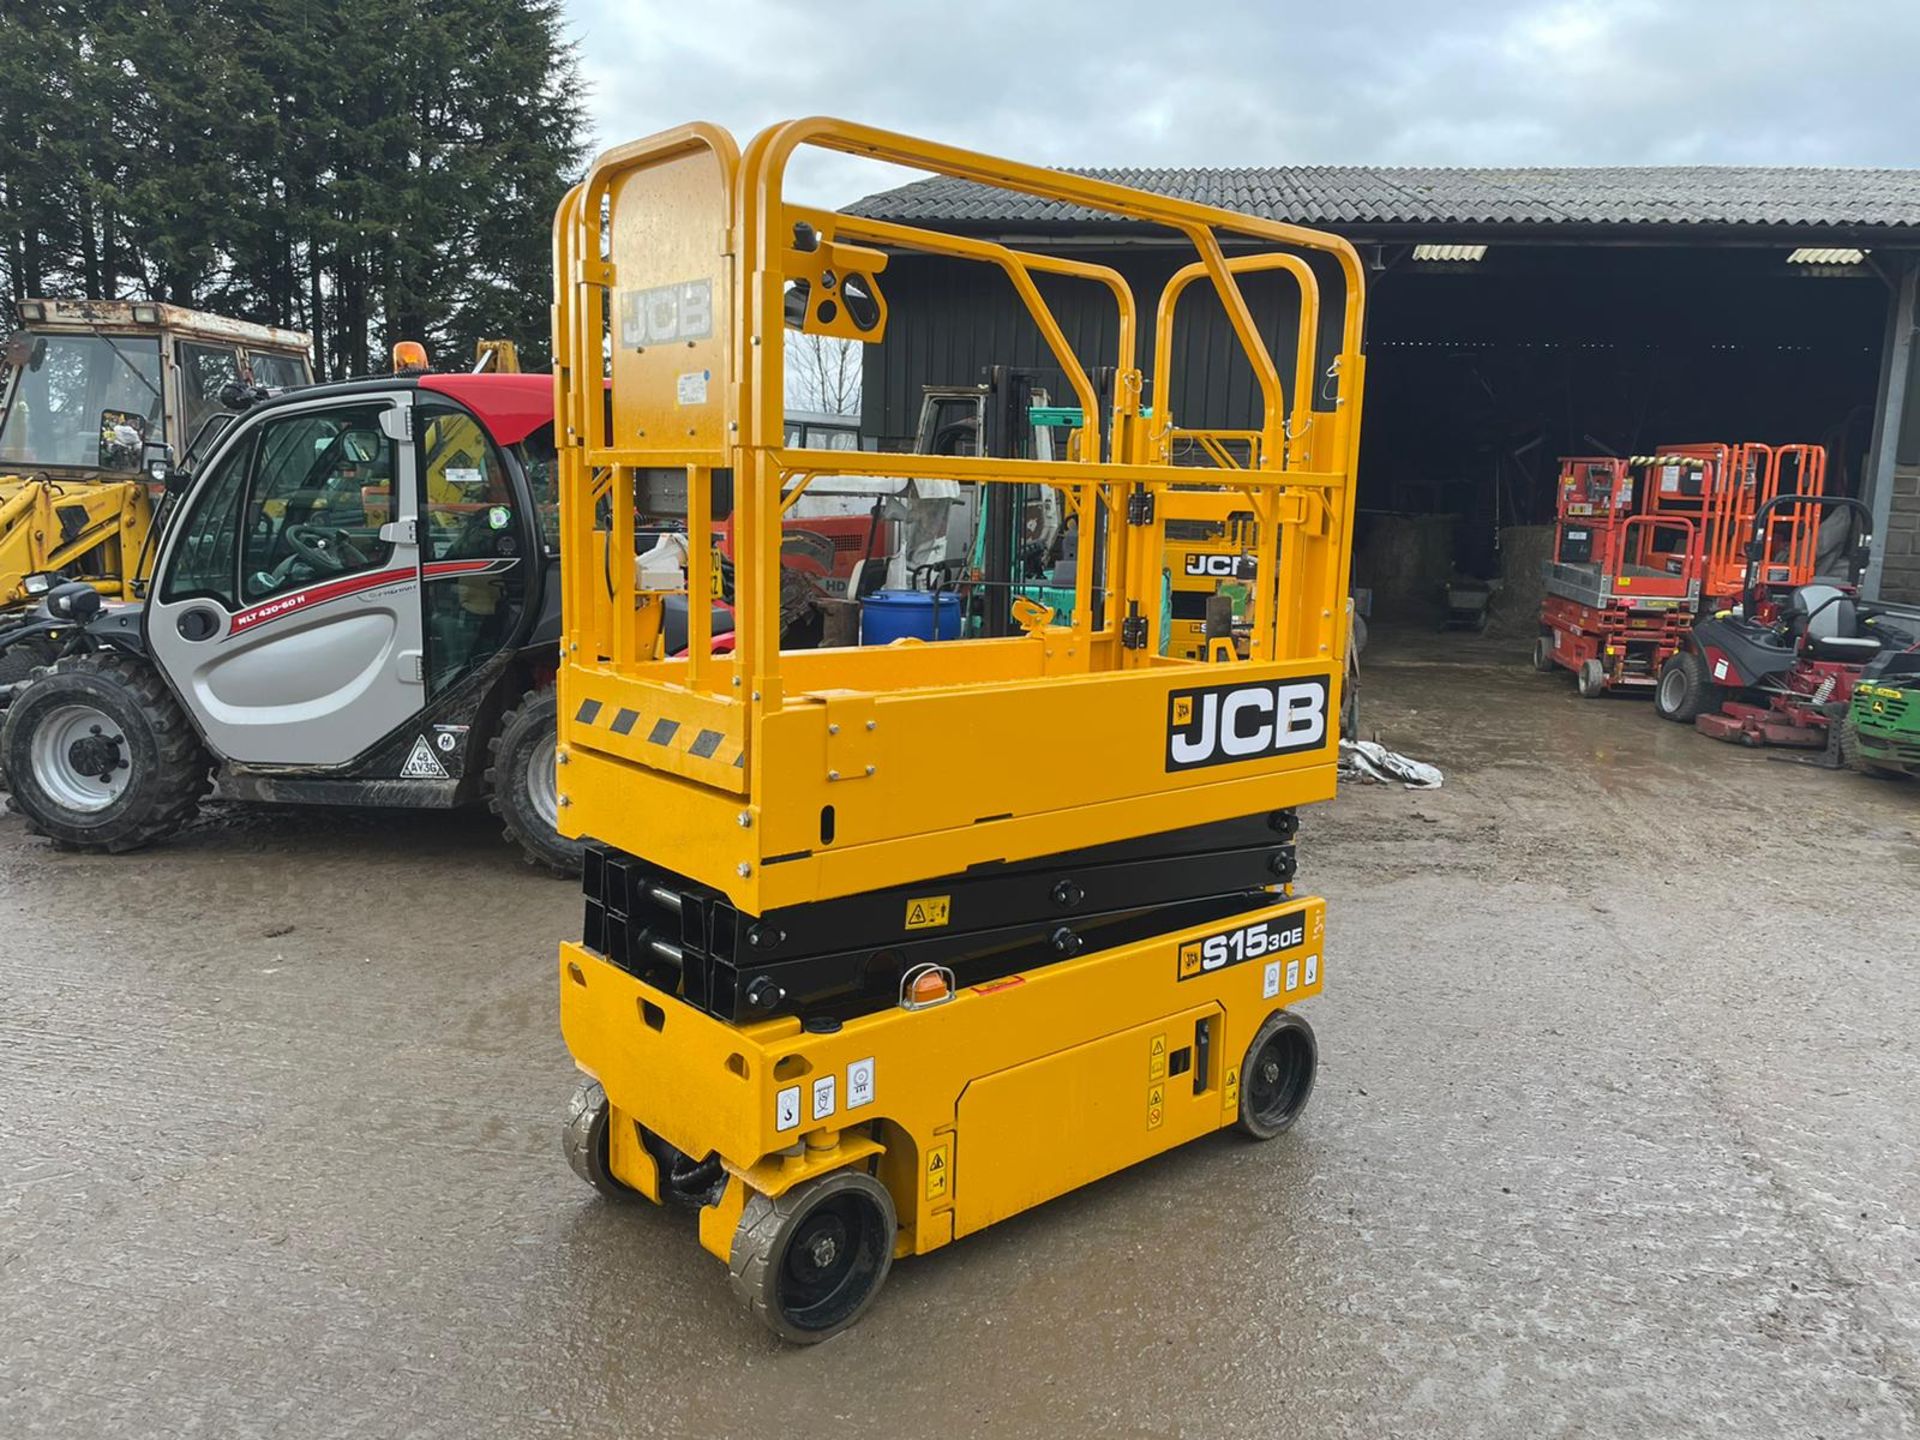 2019 JCB S1530E ELECTRIC SCISSOR LIFT, as new - EX DEMO CONDITION 3 hrs only *PLUS VAT* - Image 5 of 5